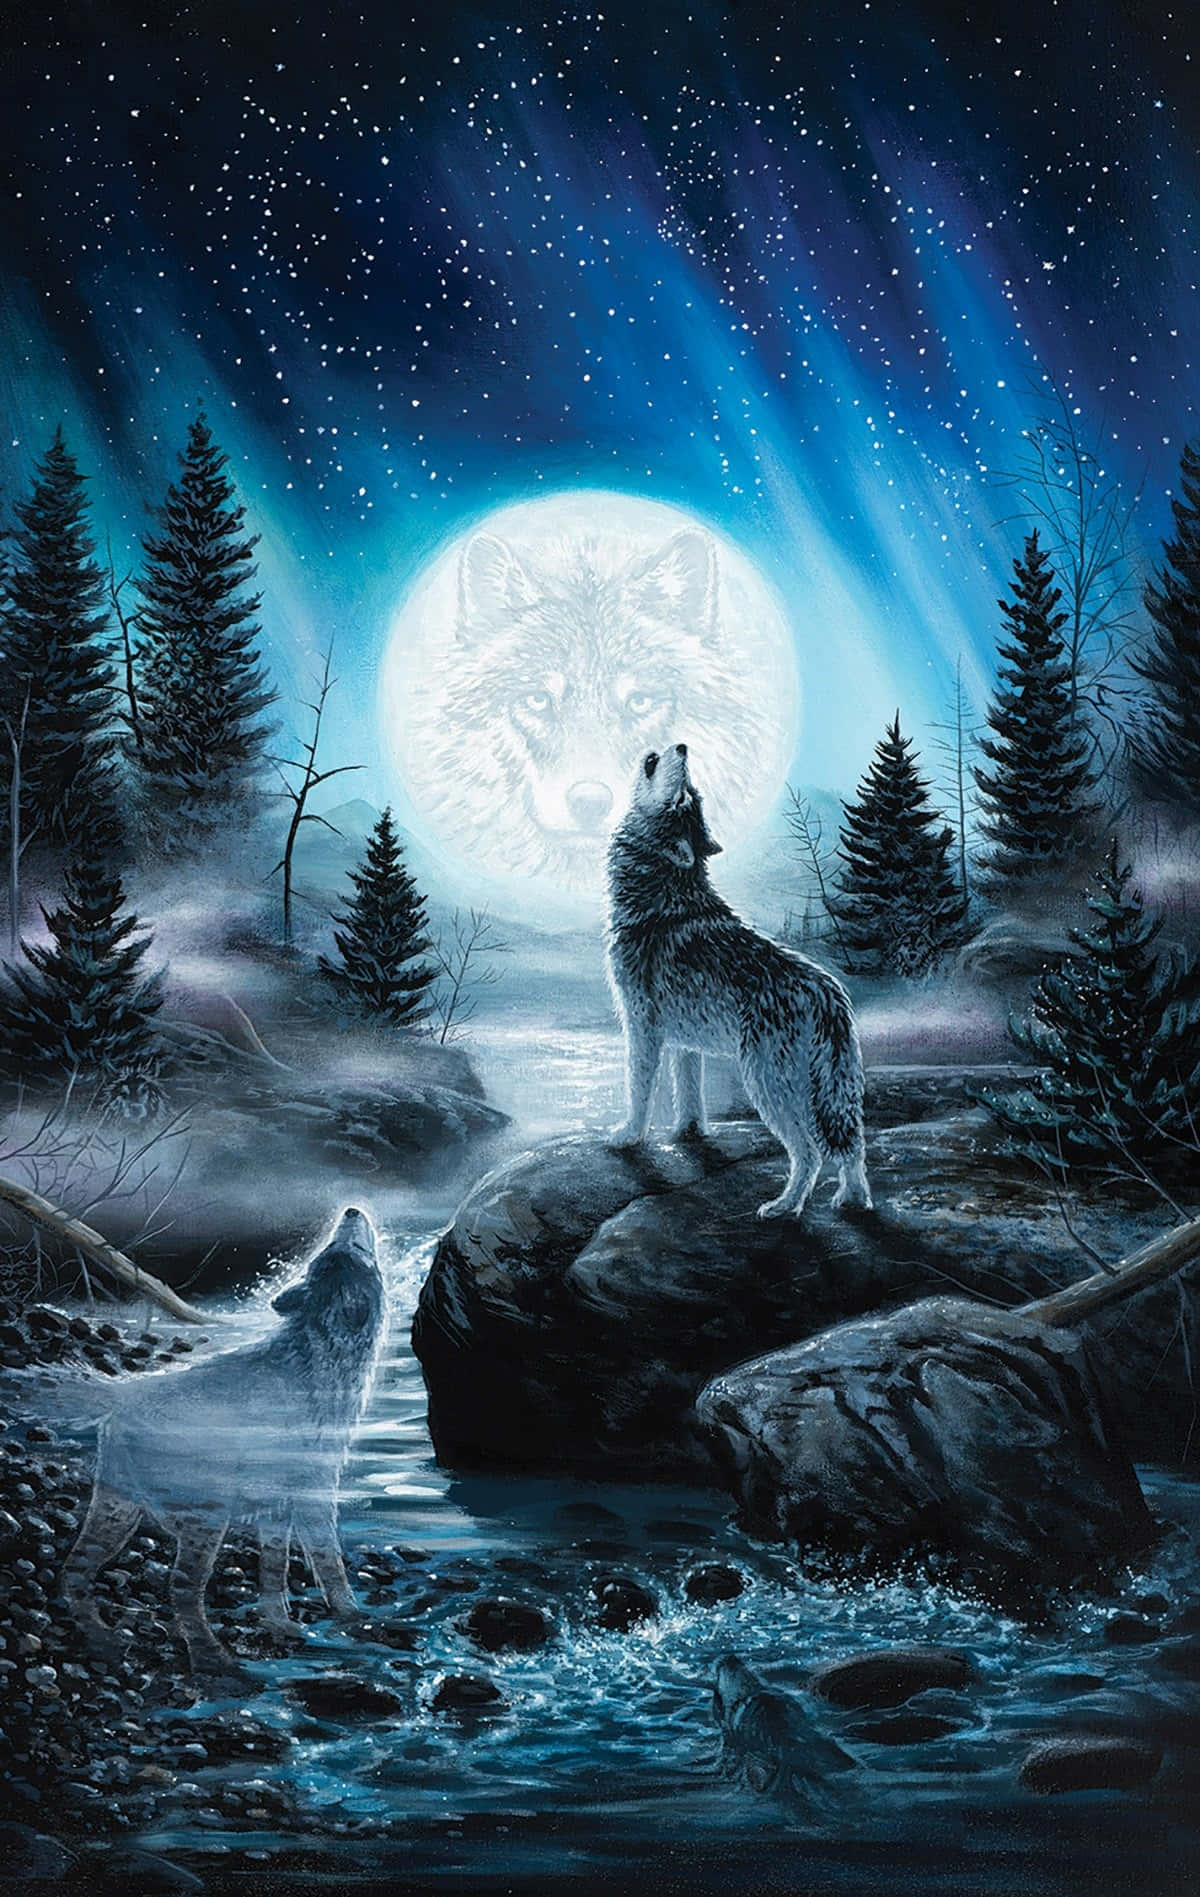 A Lone Howling Wolf Against a Misty Night Sky